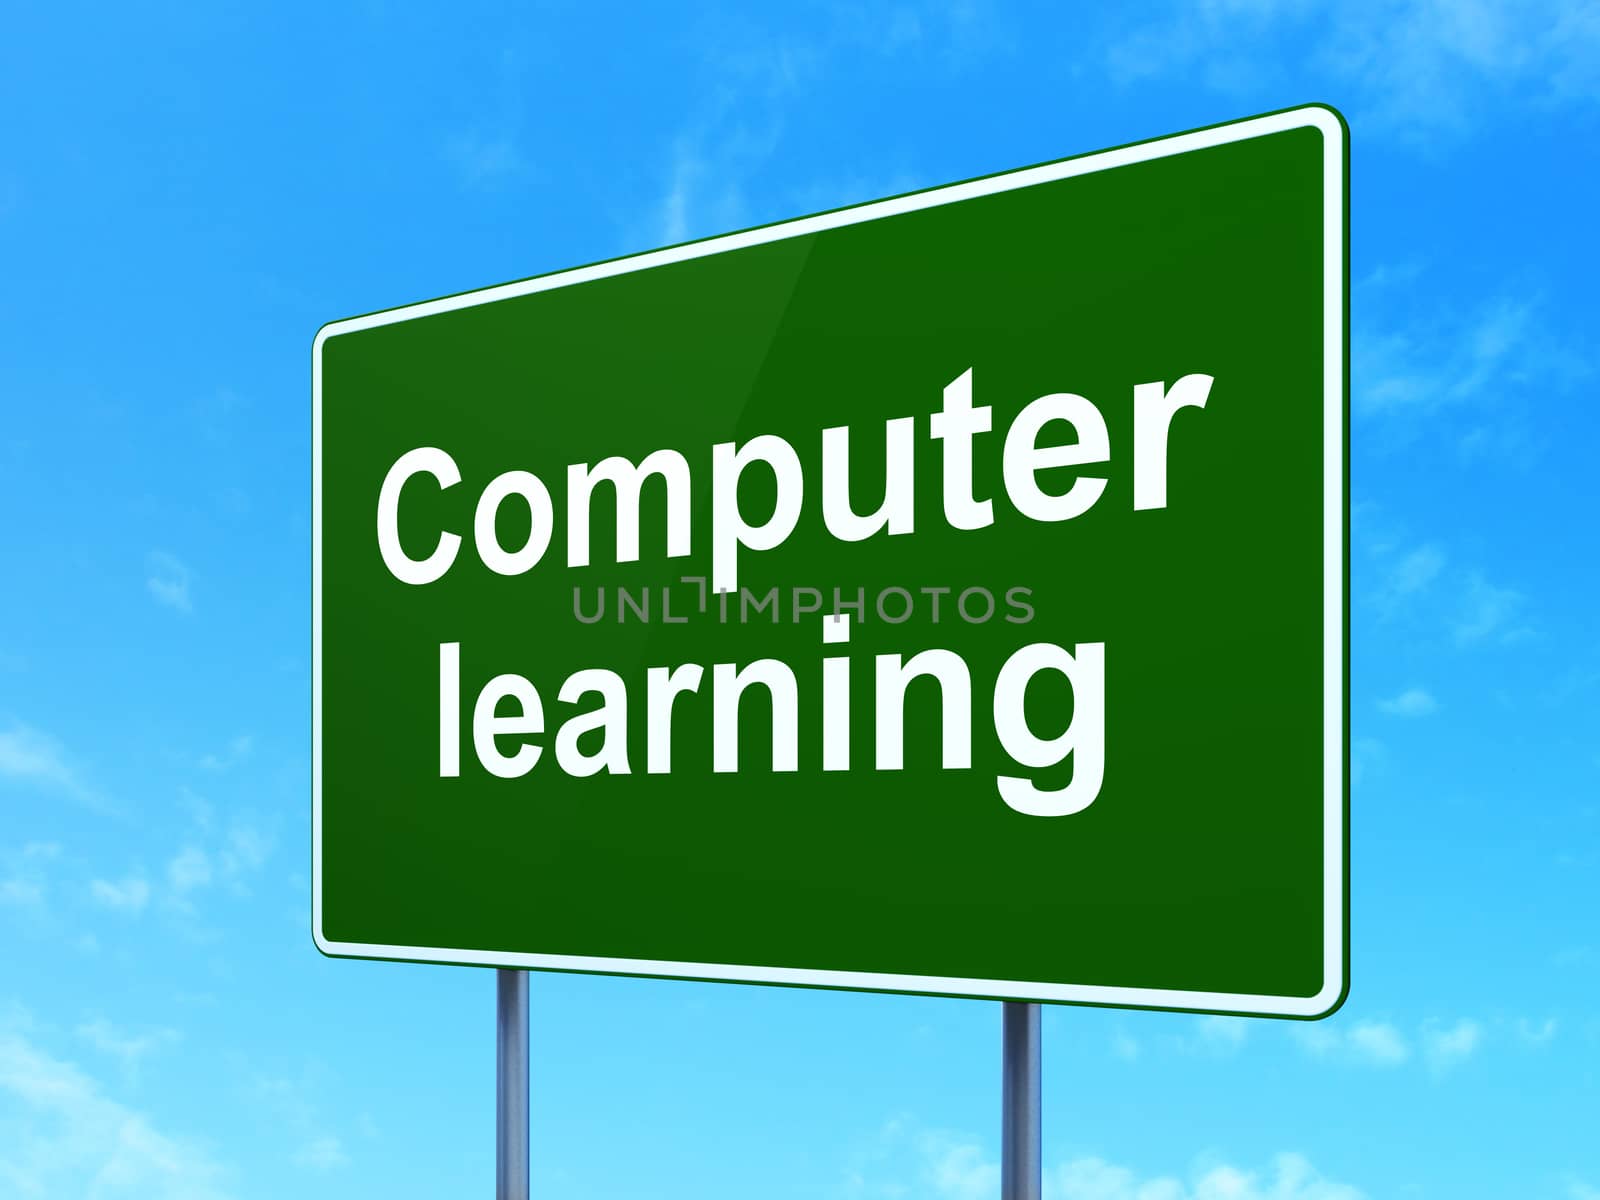 Studying concept: Computer Learning on green road highway sign, clear blue sky background, 3D rendering